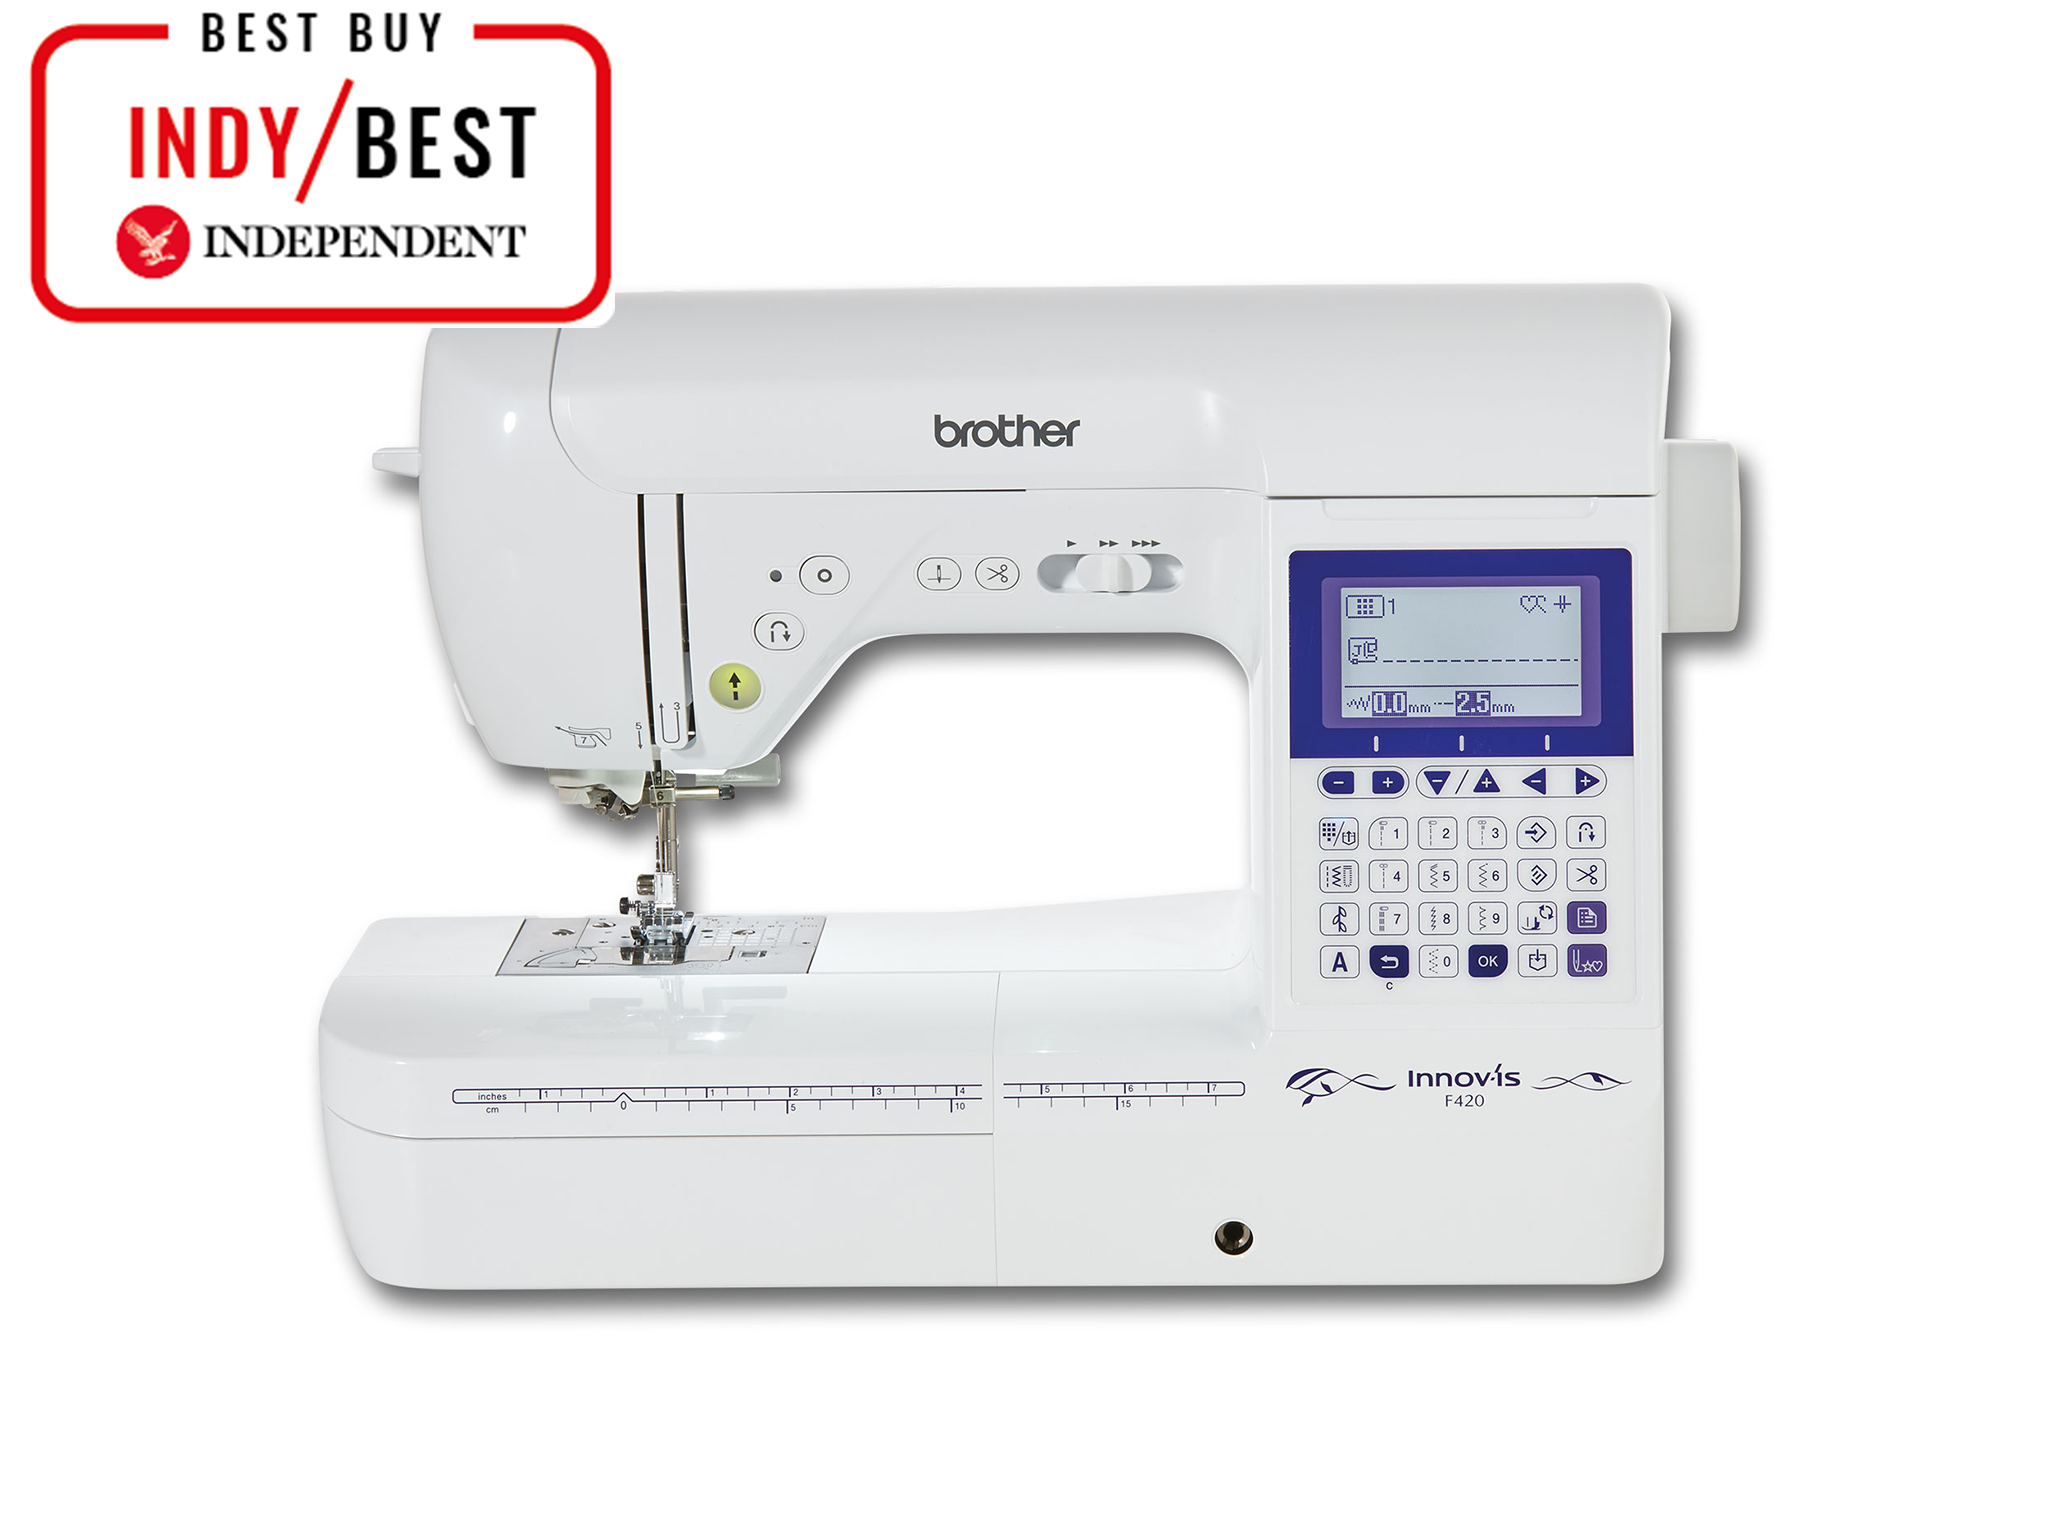 BROTHER INNOV-IS F420 SEWING MACHINE